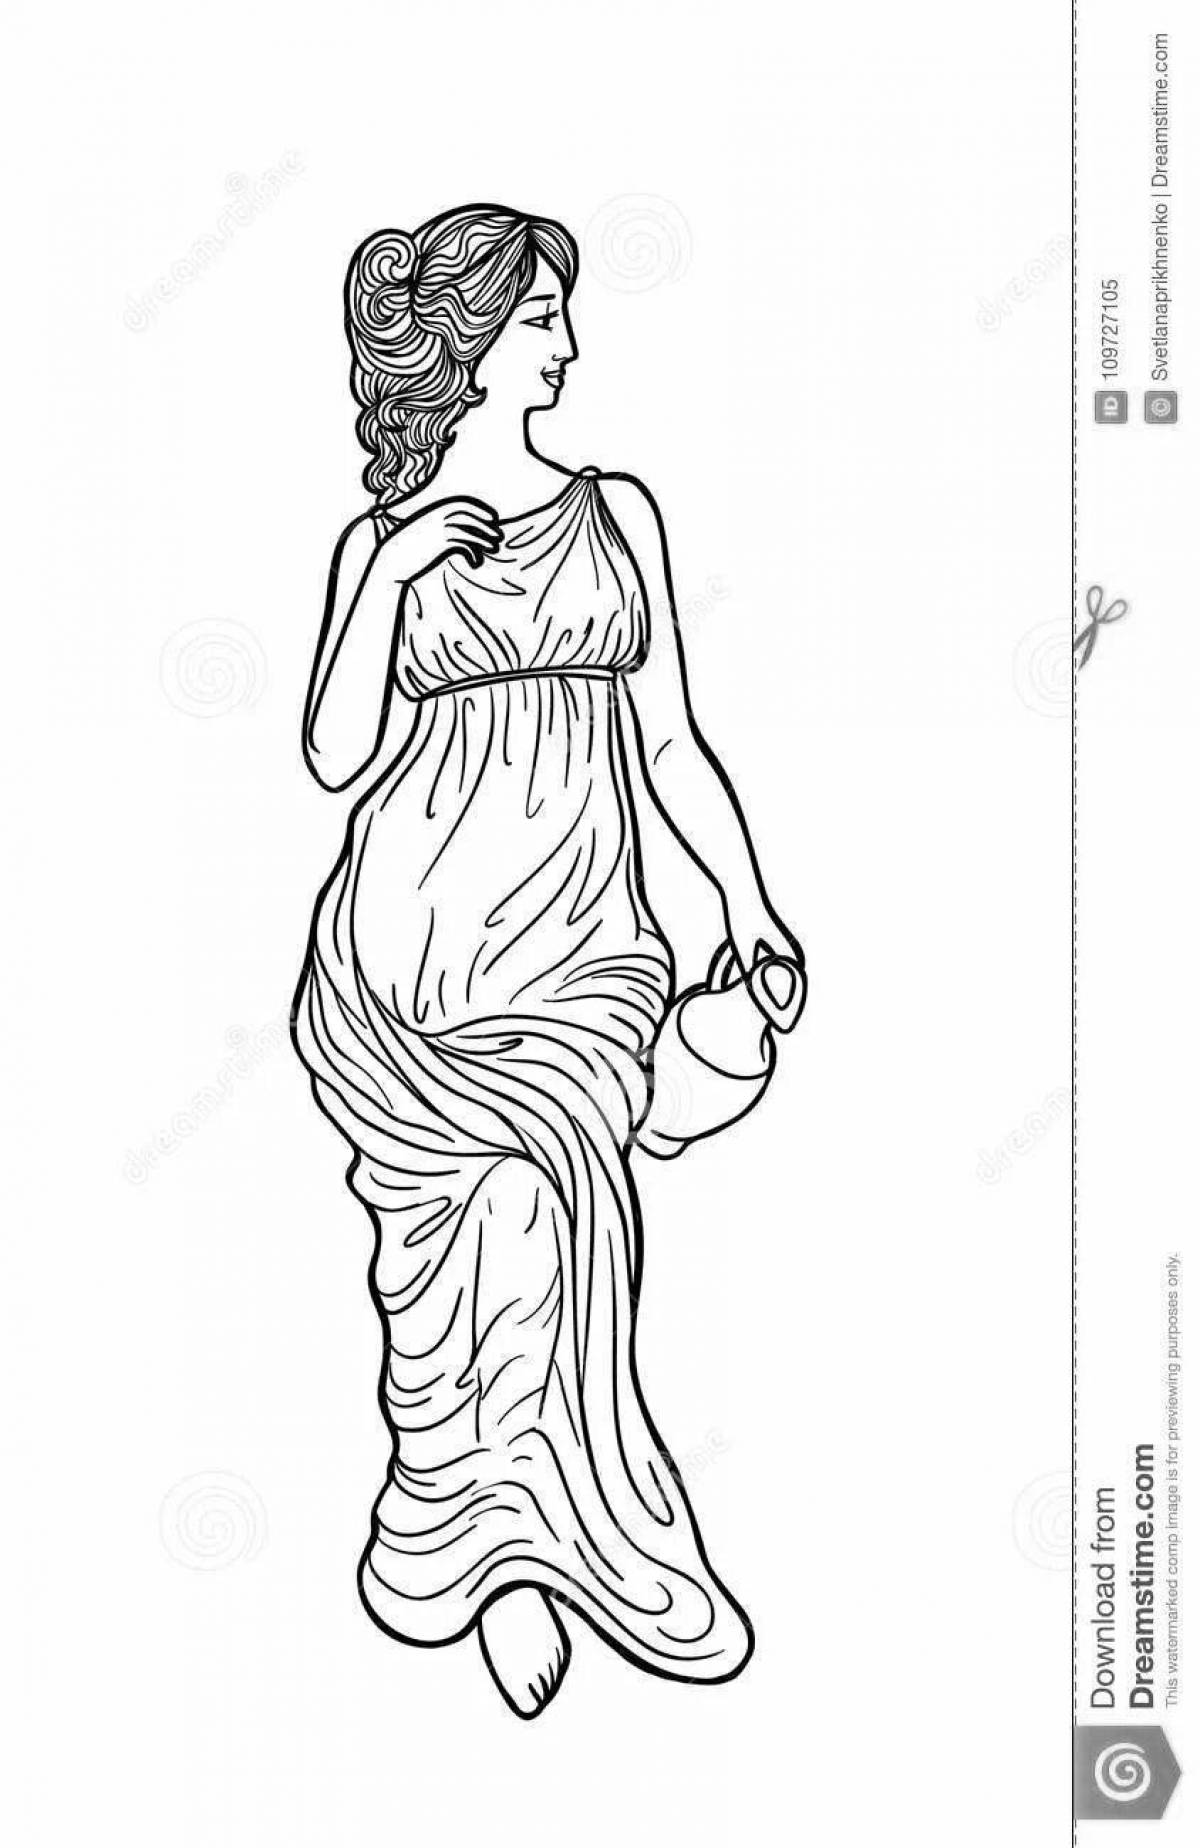 Gorgeous aphrodite goddess coloring page